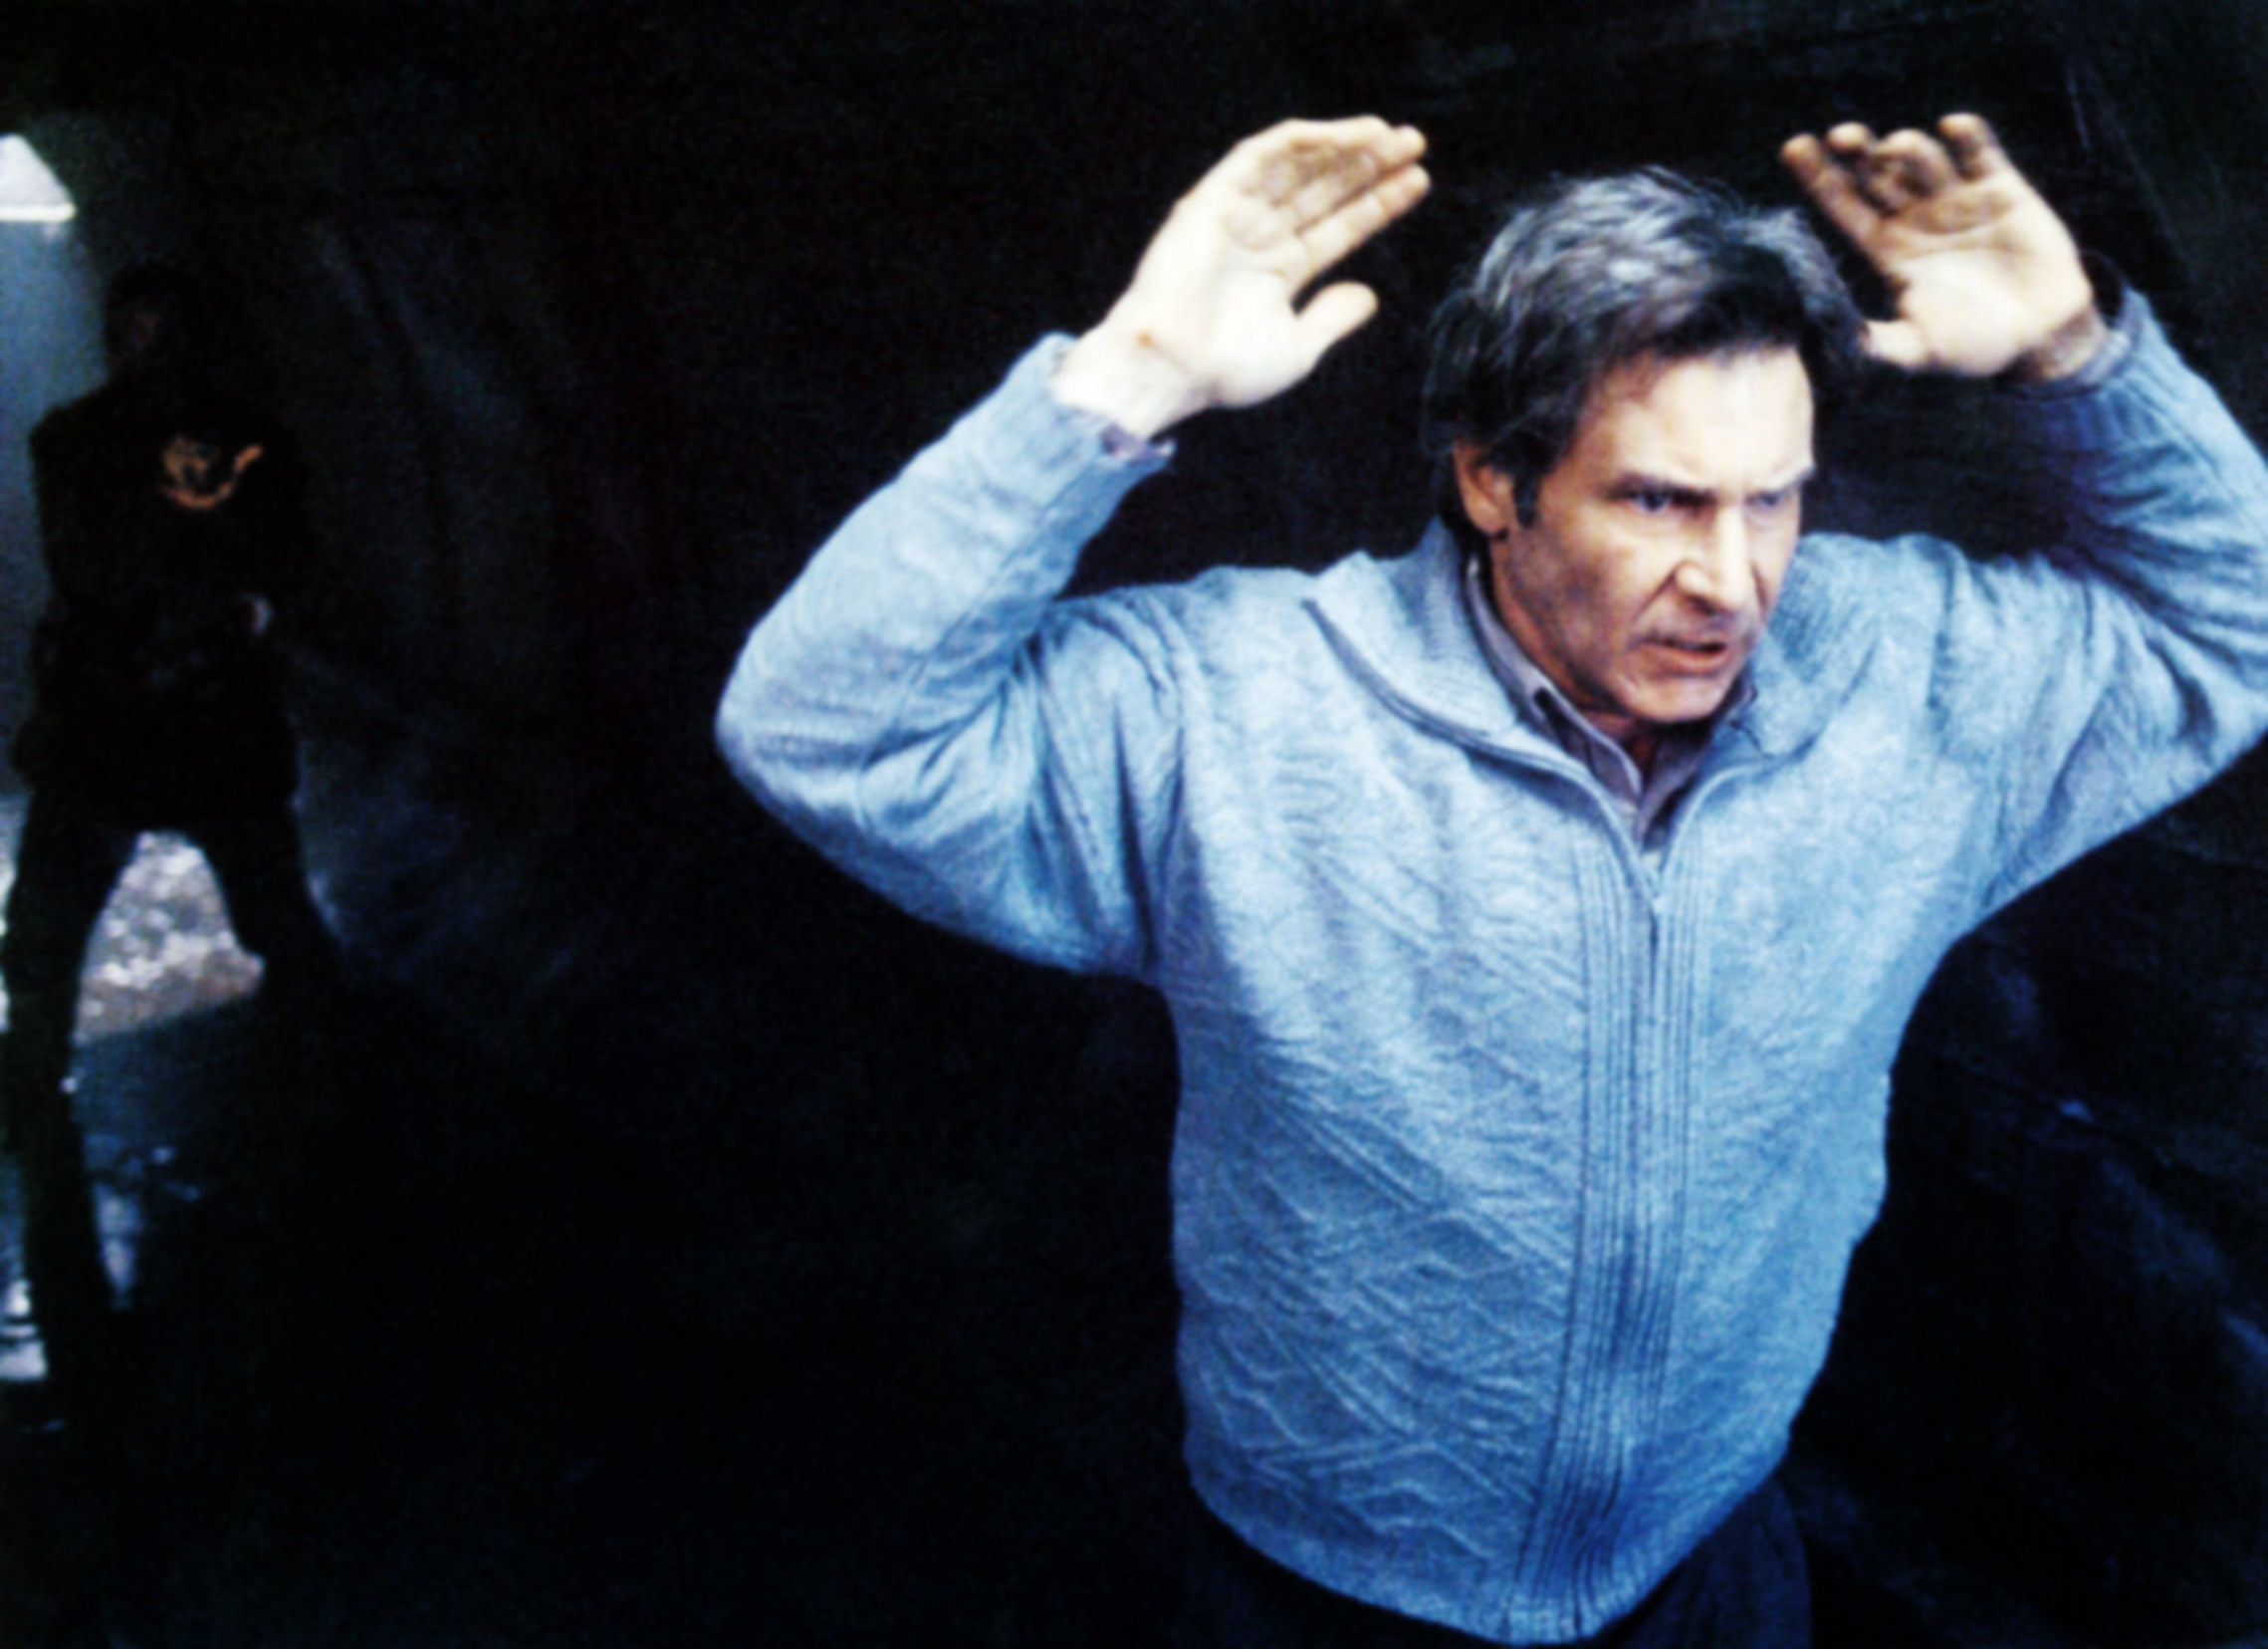 Harrison Ford putting his hands above his head.